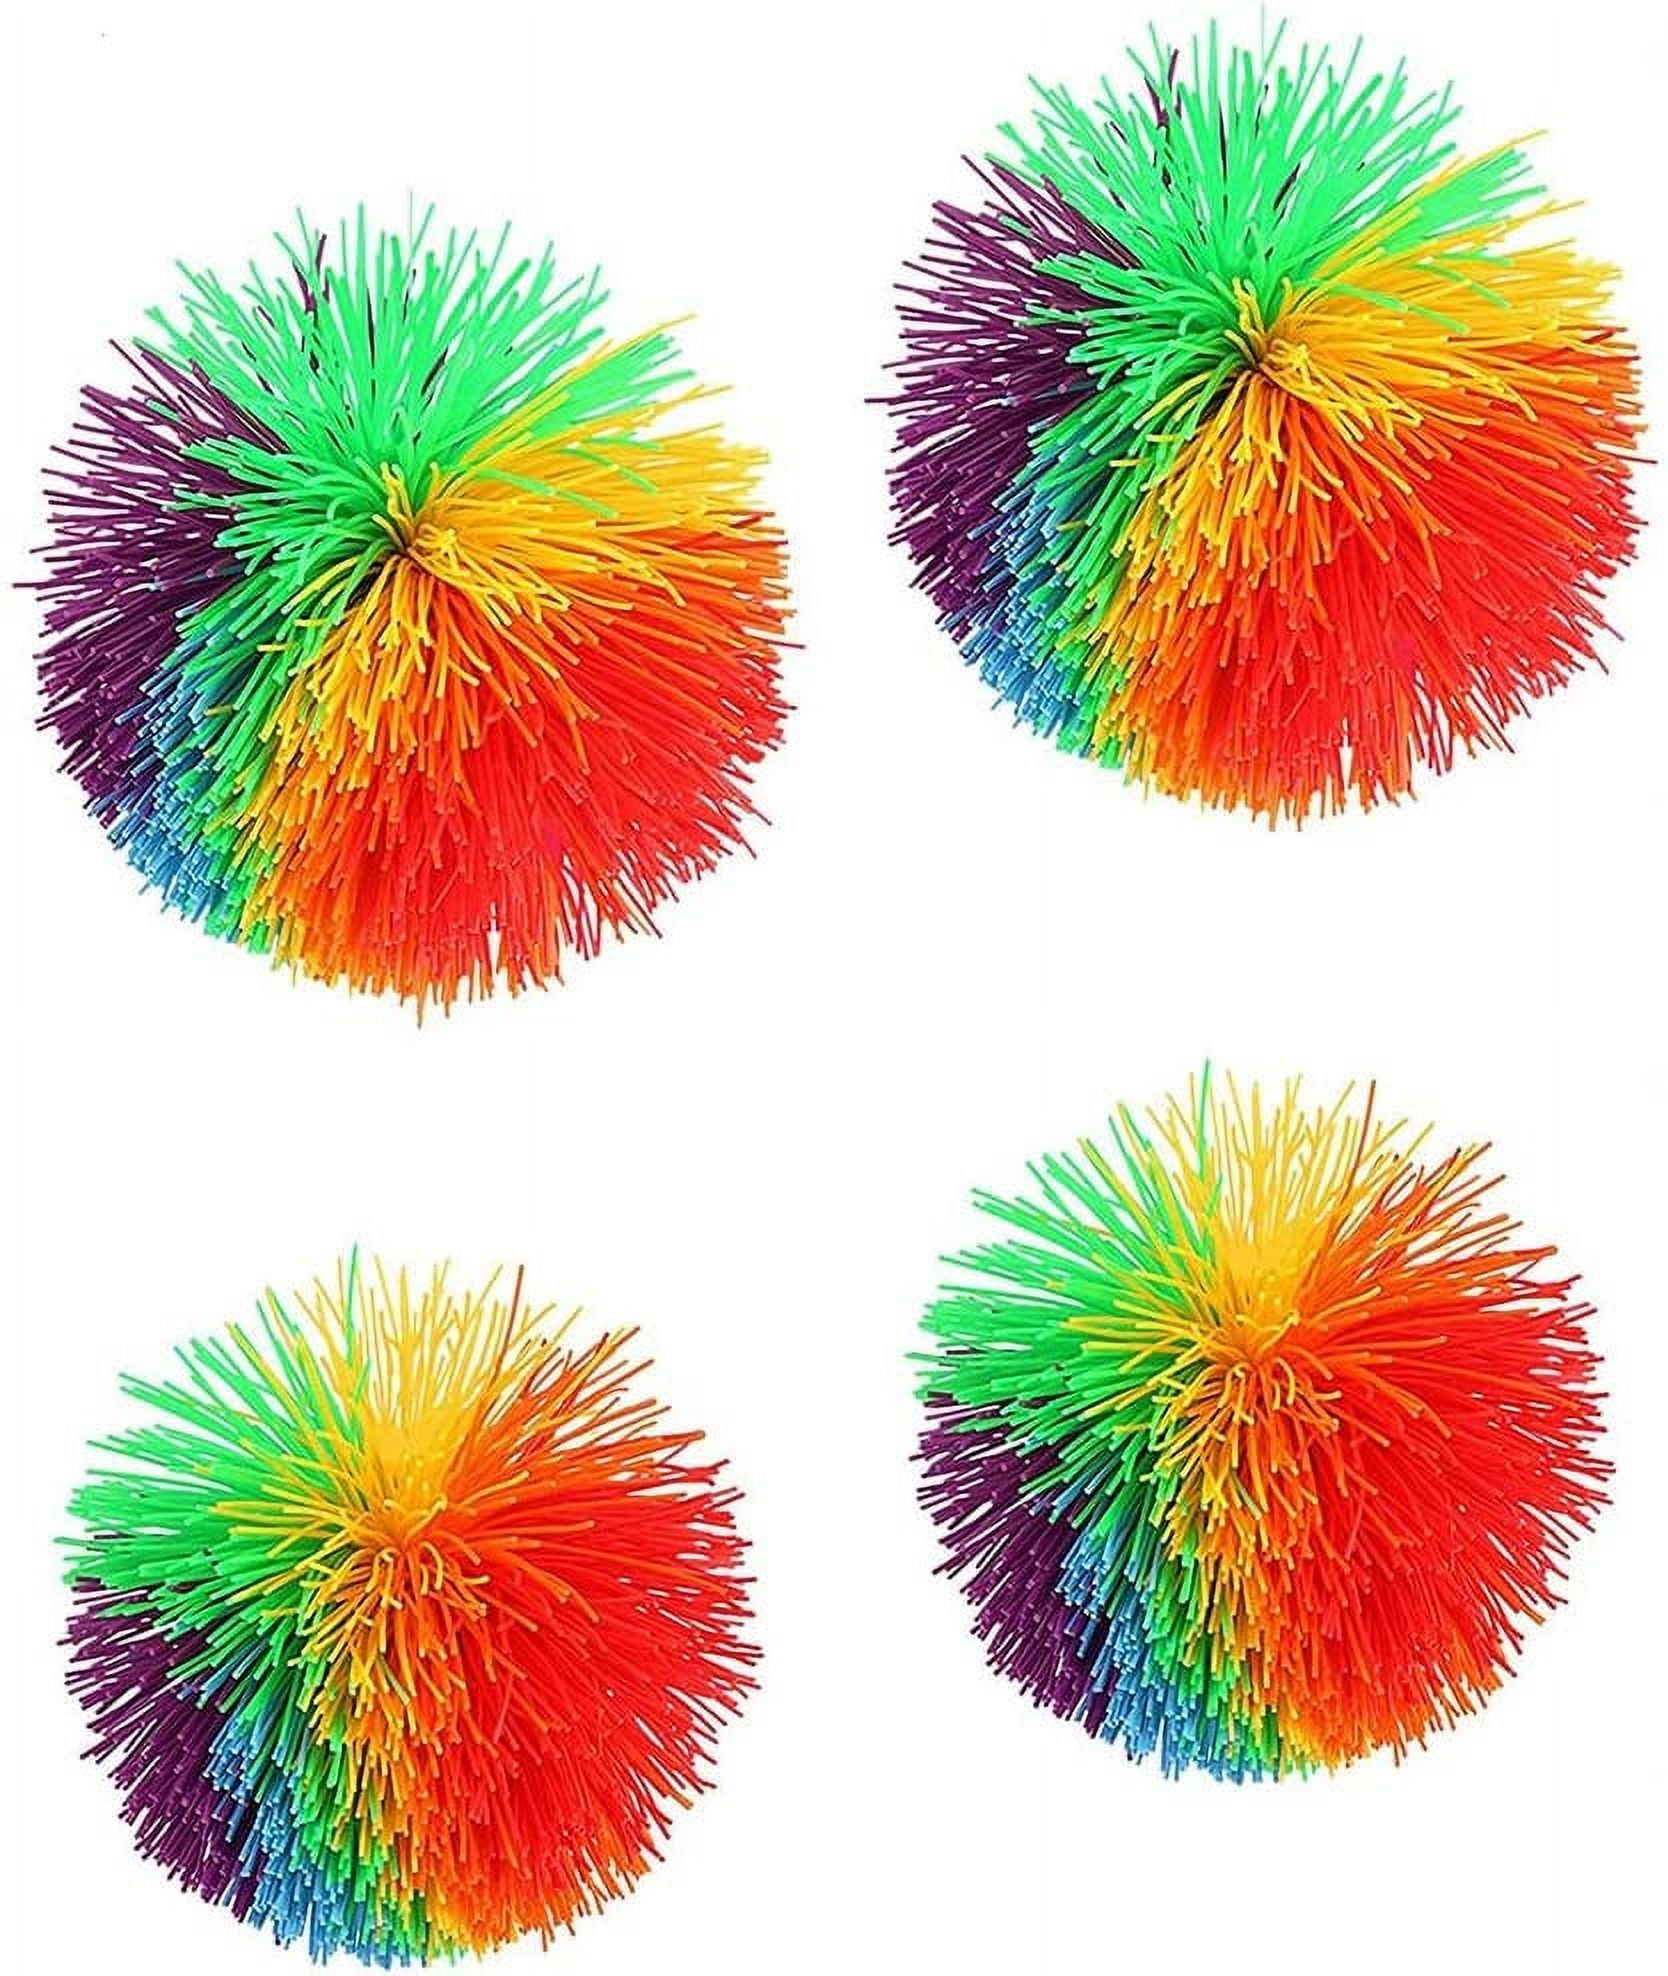 Pluokvzr 2/1 Pack Rainbow Stress Relief Toy Sticky Ball - Anti Stress  Squishy Sensory Balls Elastic Fidget Squeeze Balls, Non-Toxic for Adults  Kids